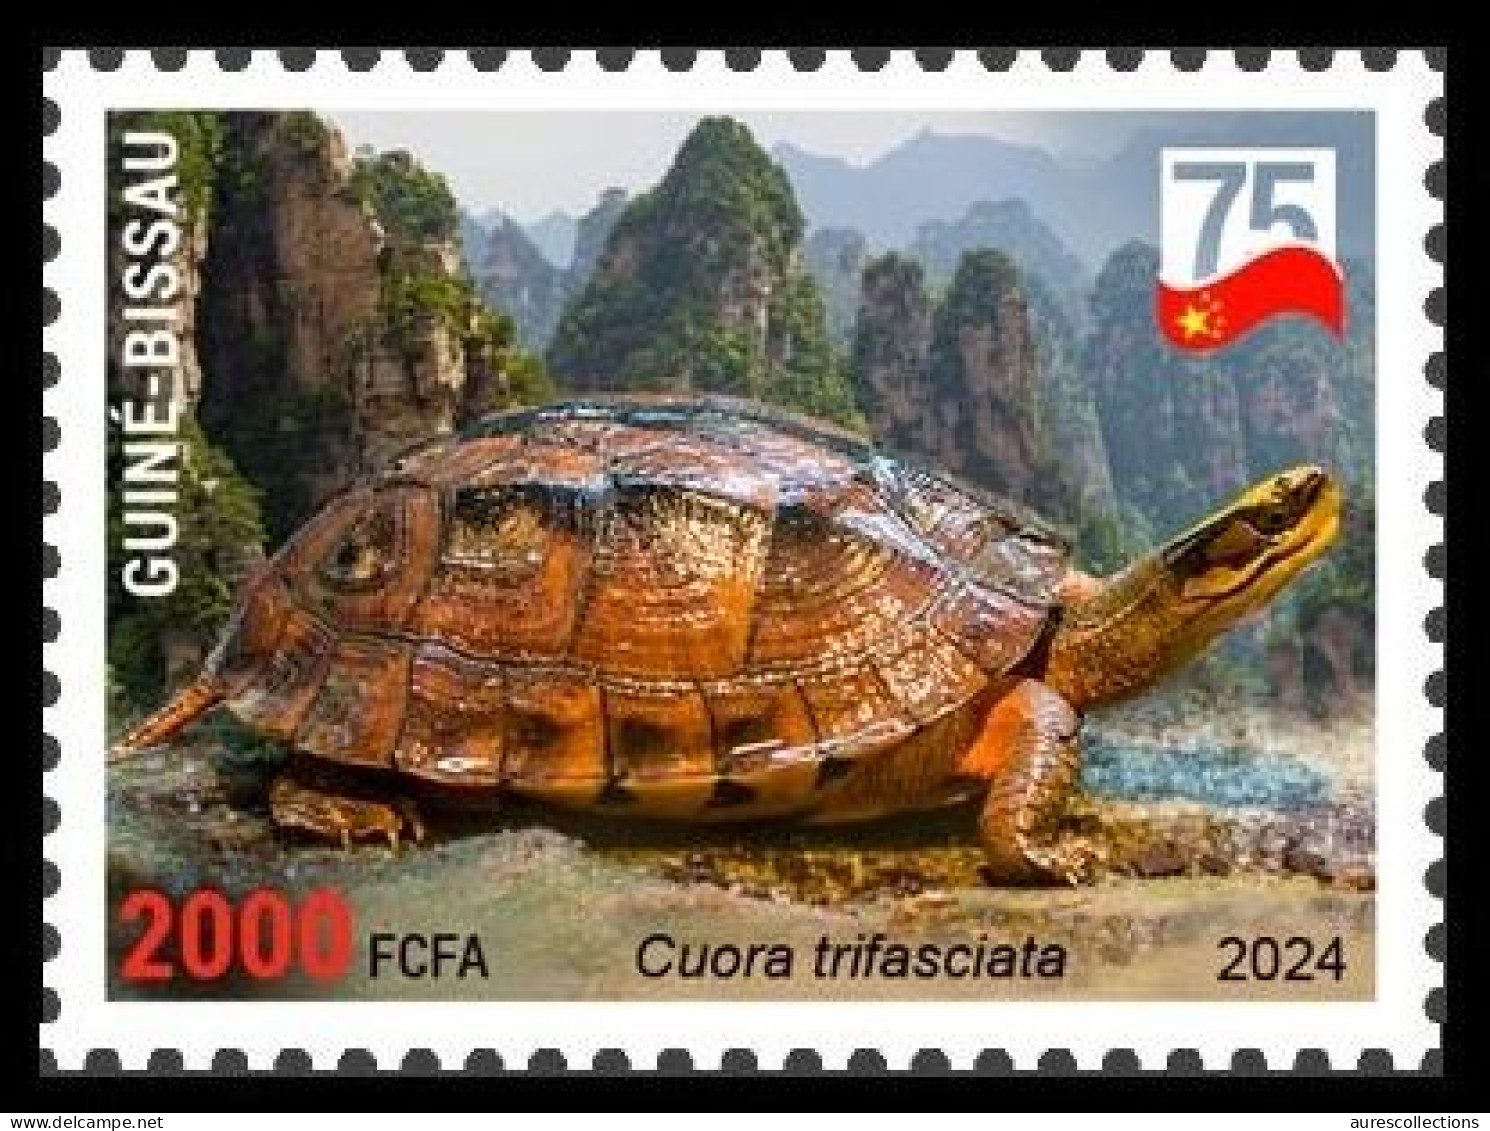 GUINEA BISSAU 2024 STAMP 1V - CHINA AMPHIBIANS & REPTILES - GOLDEN COIN TURTLE TURTLES TORTUES - CHINA 75 ANNIV. - MNH - Tortugas